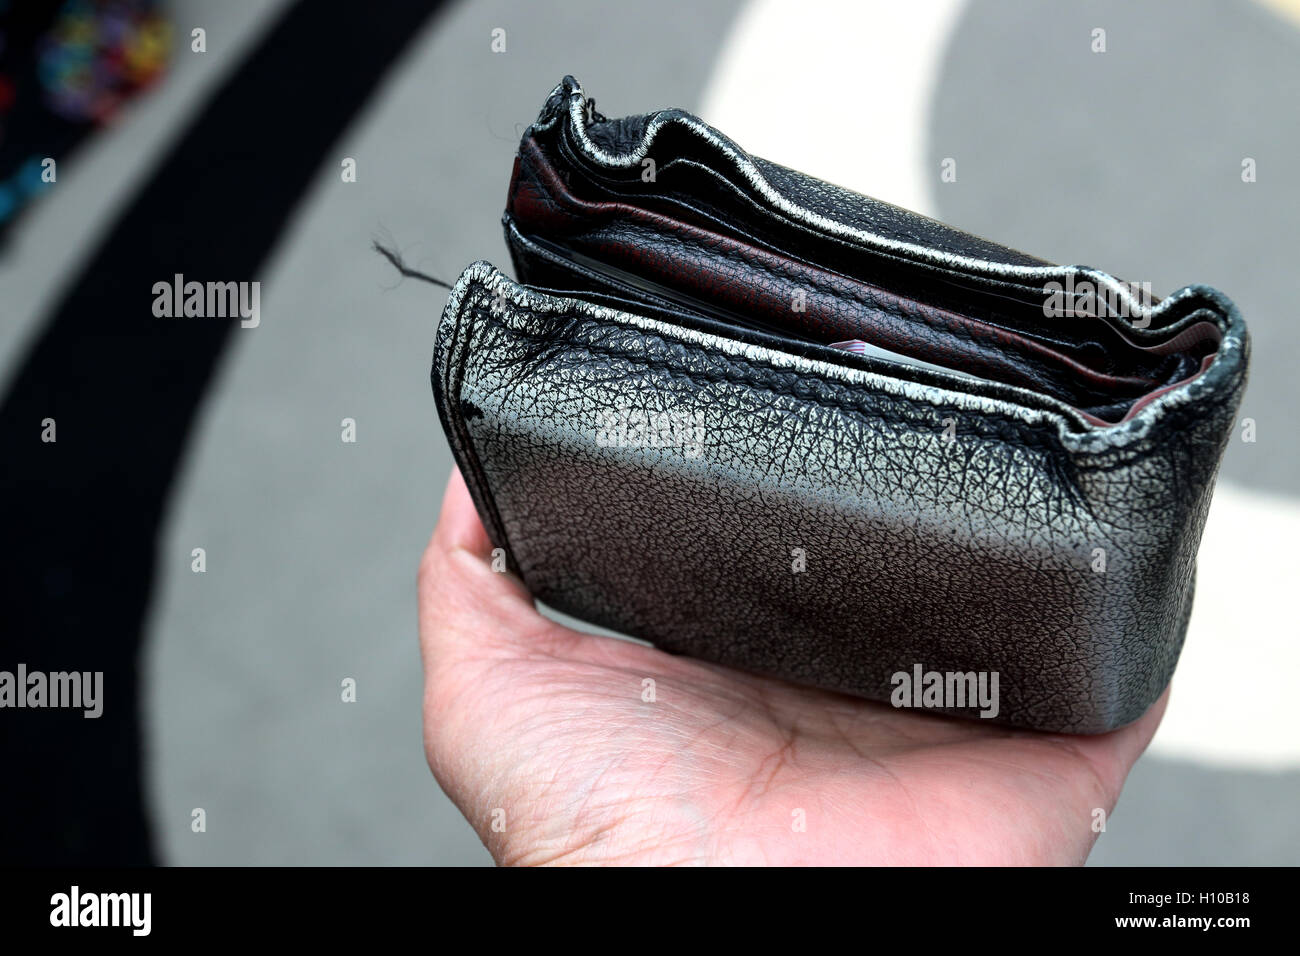 Hand holding Old worn wallet Stock Photo